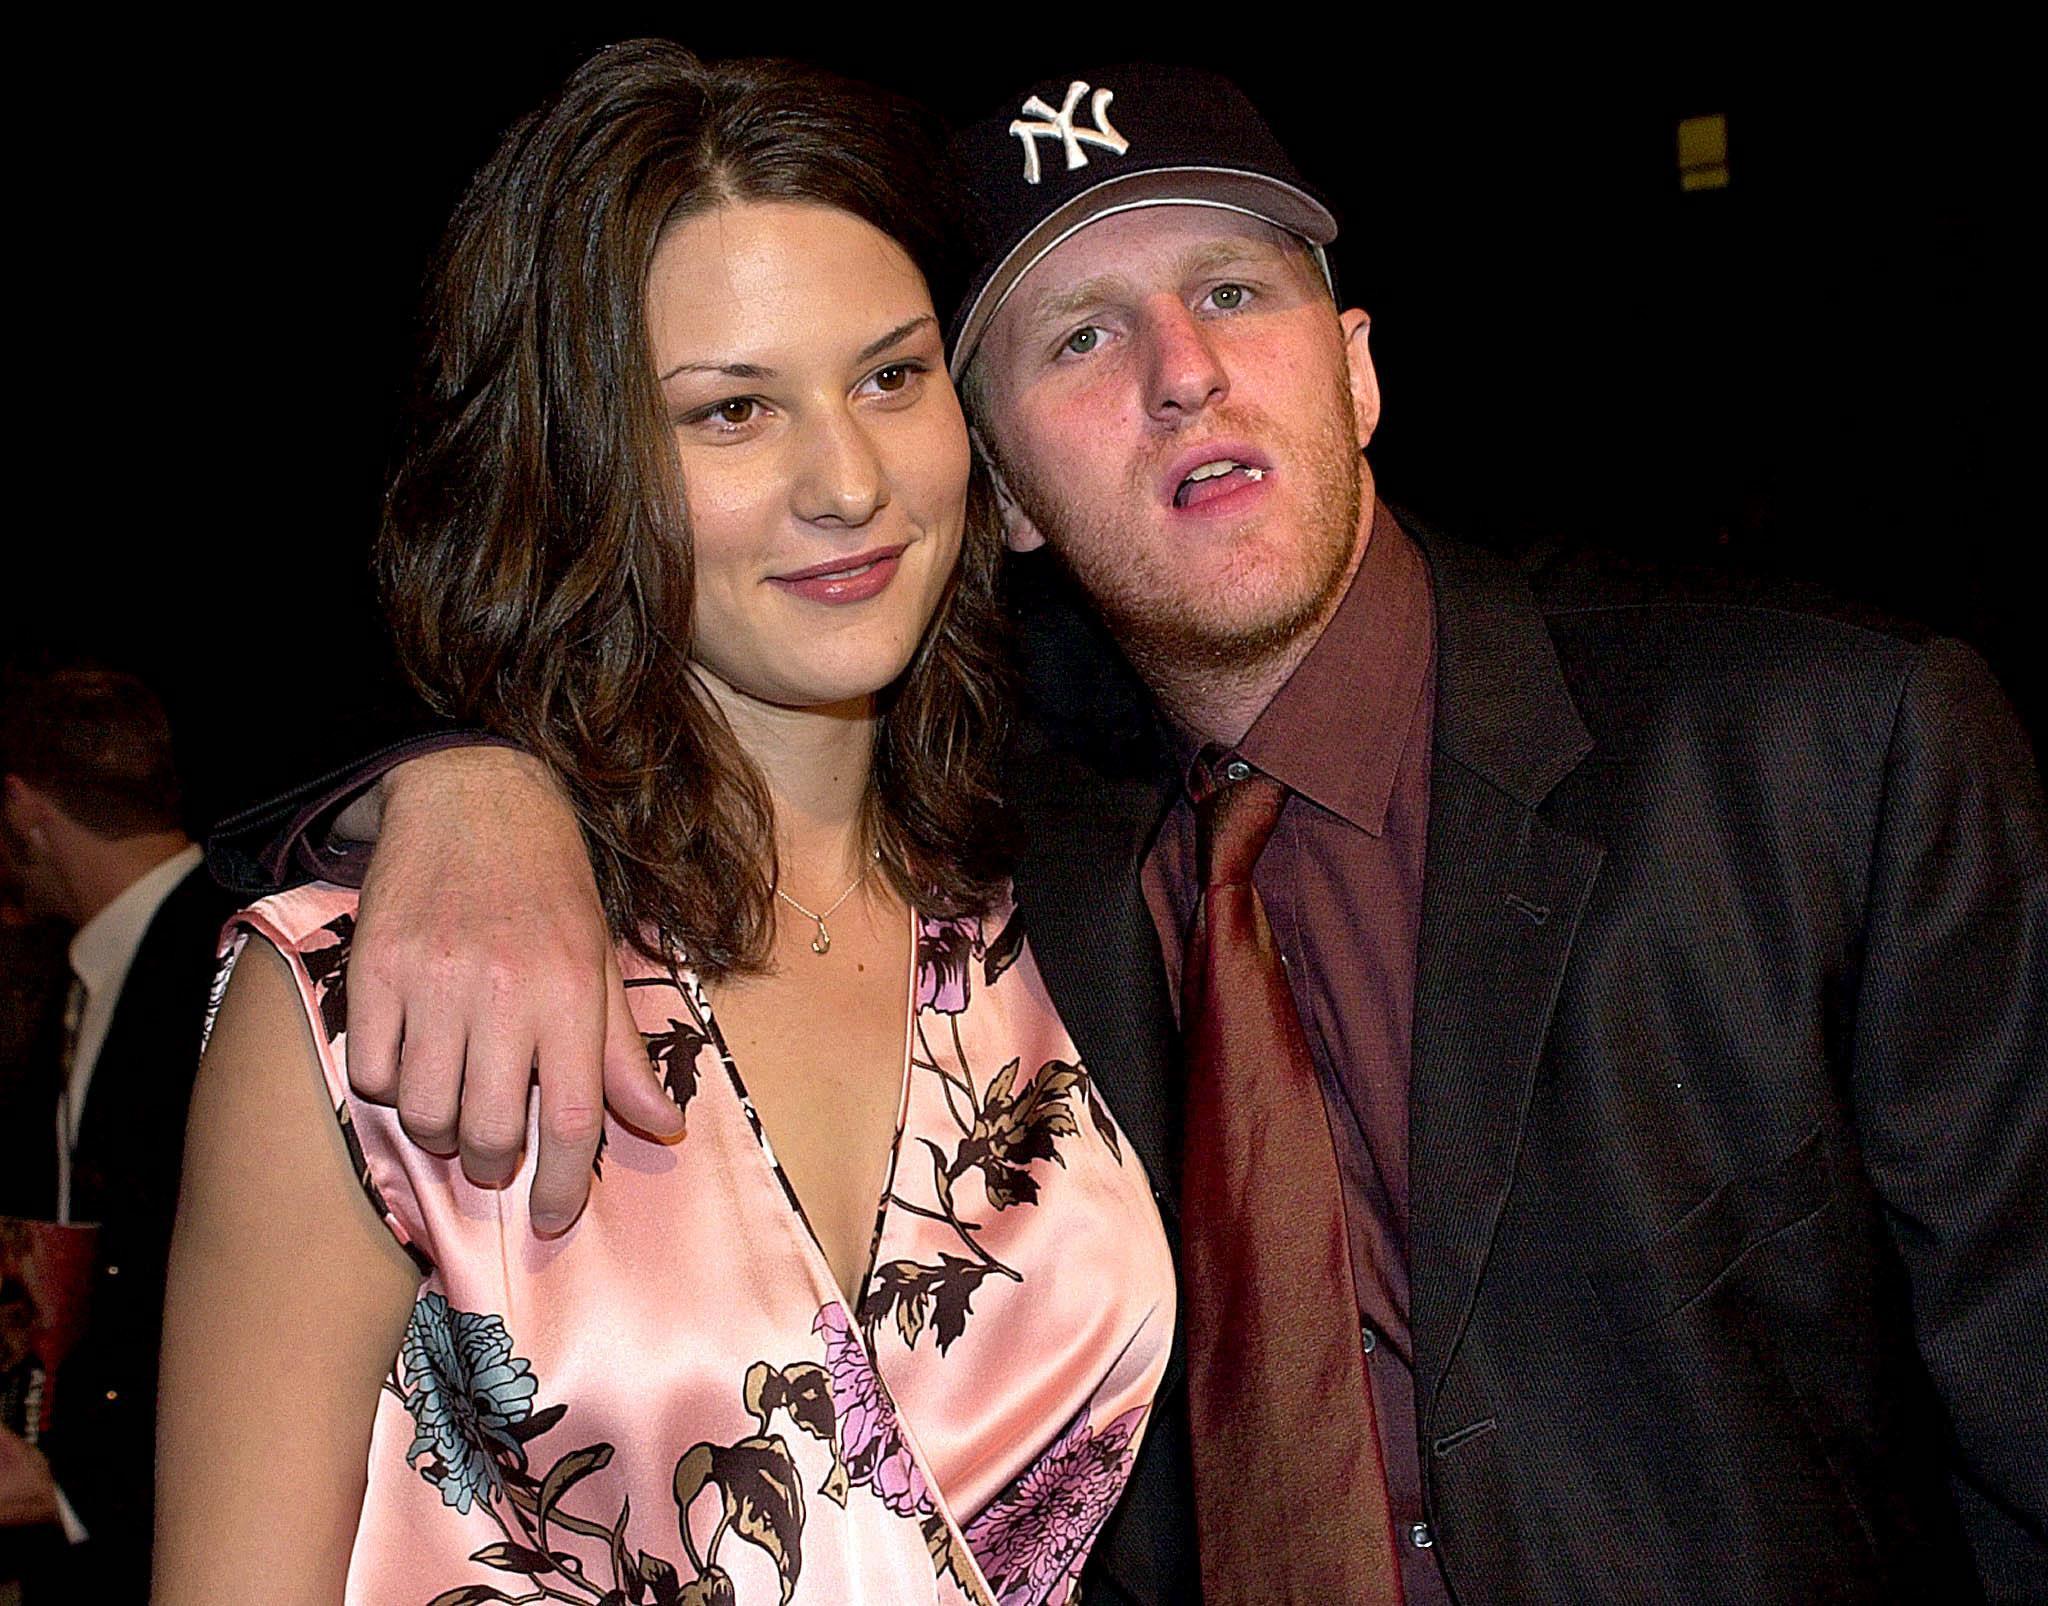 Michael Rapaport and Nichole Beattie are pictured as they arrive at the premiere of his new film "Lucky Numbers" on October 24, 2000, in Hollywood, California | Source: Getty Images